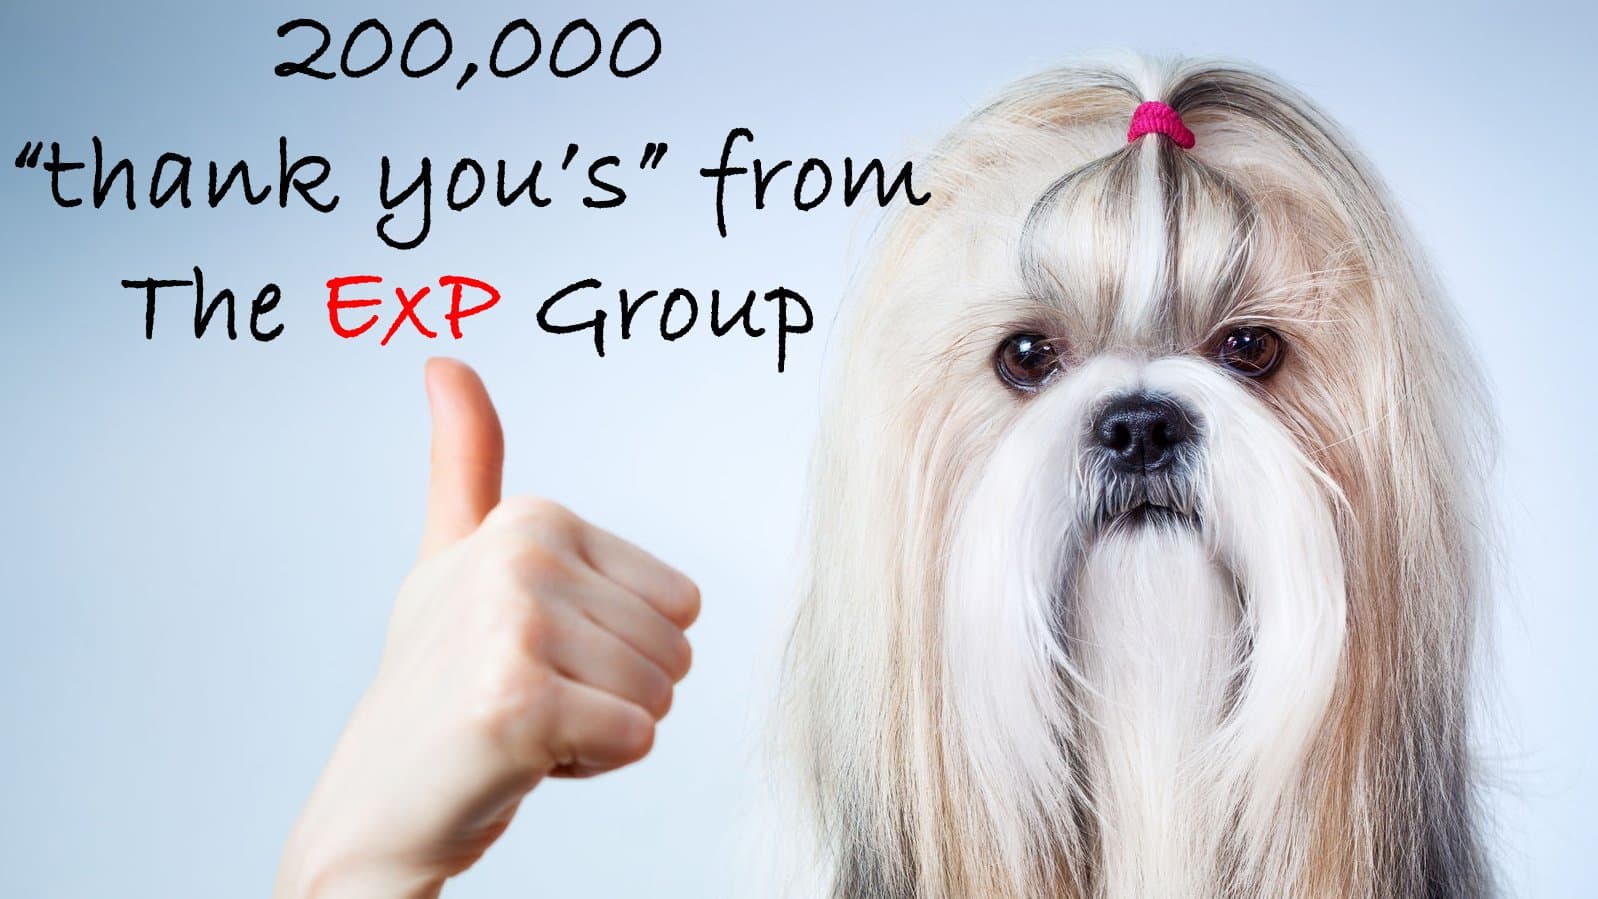 Thank you 200,000 times from ExP&#8230;